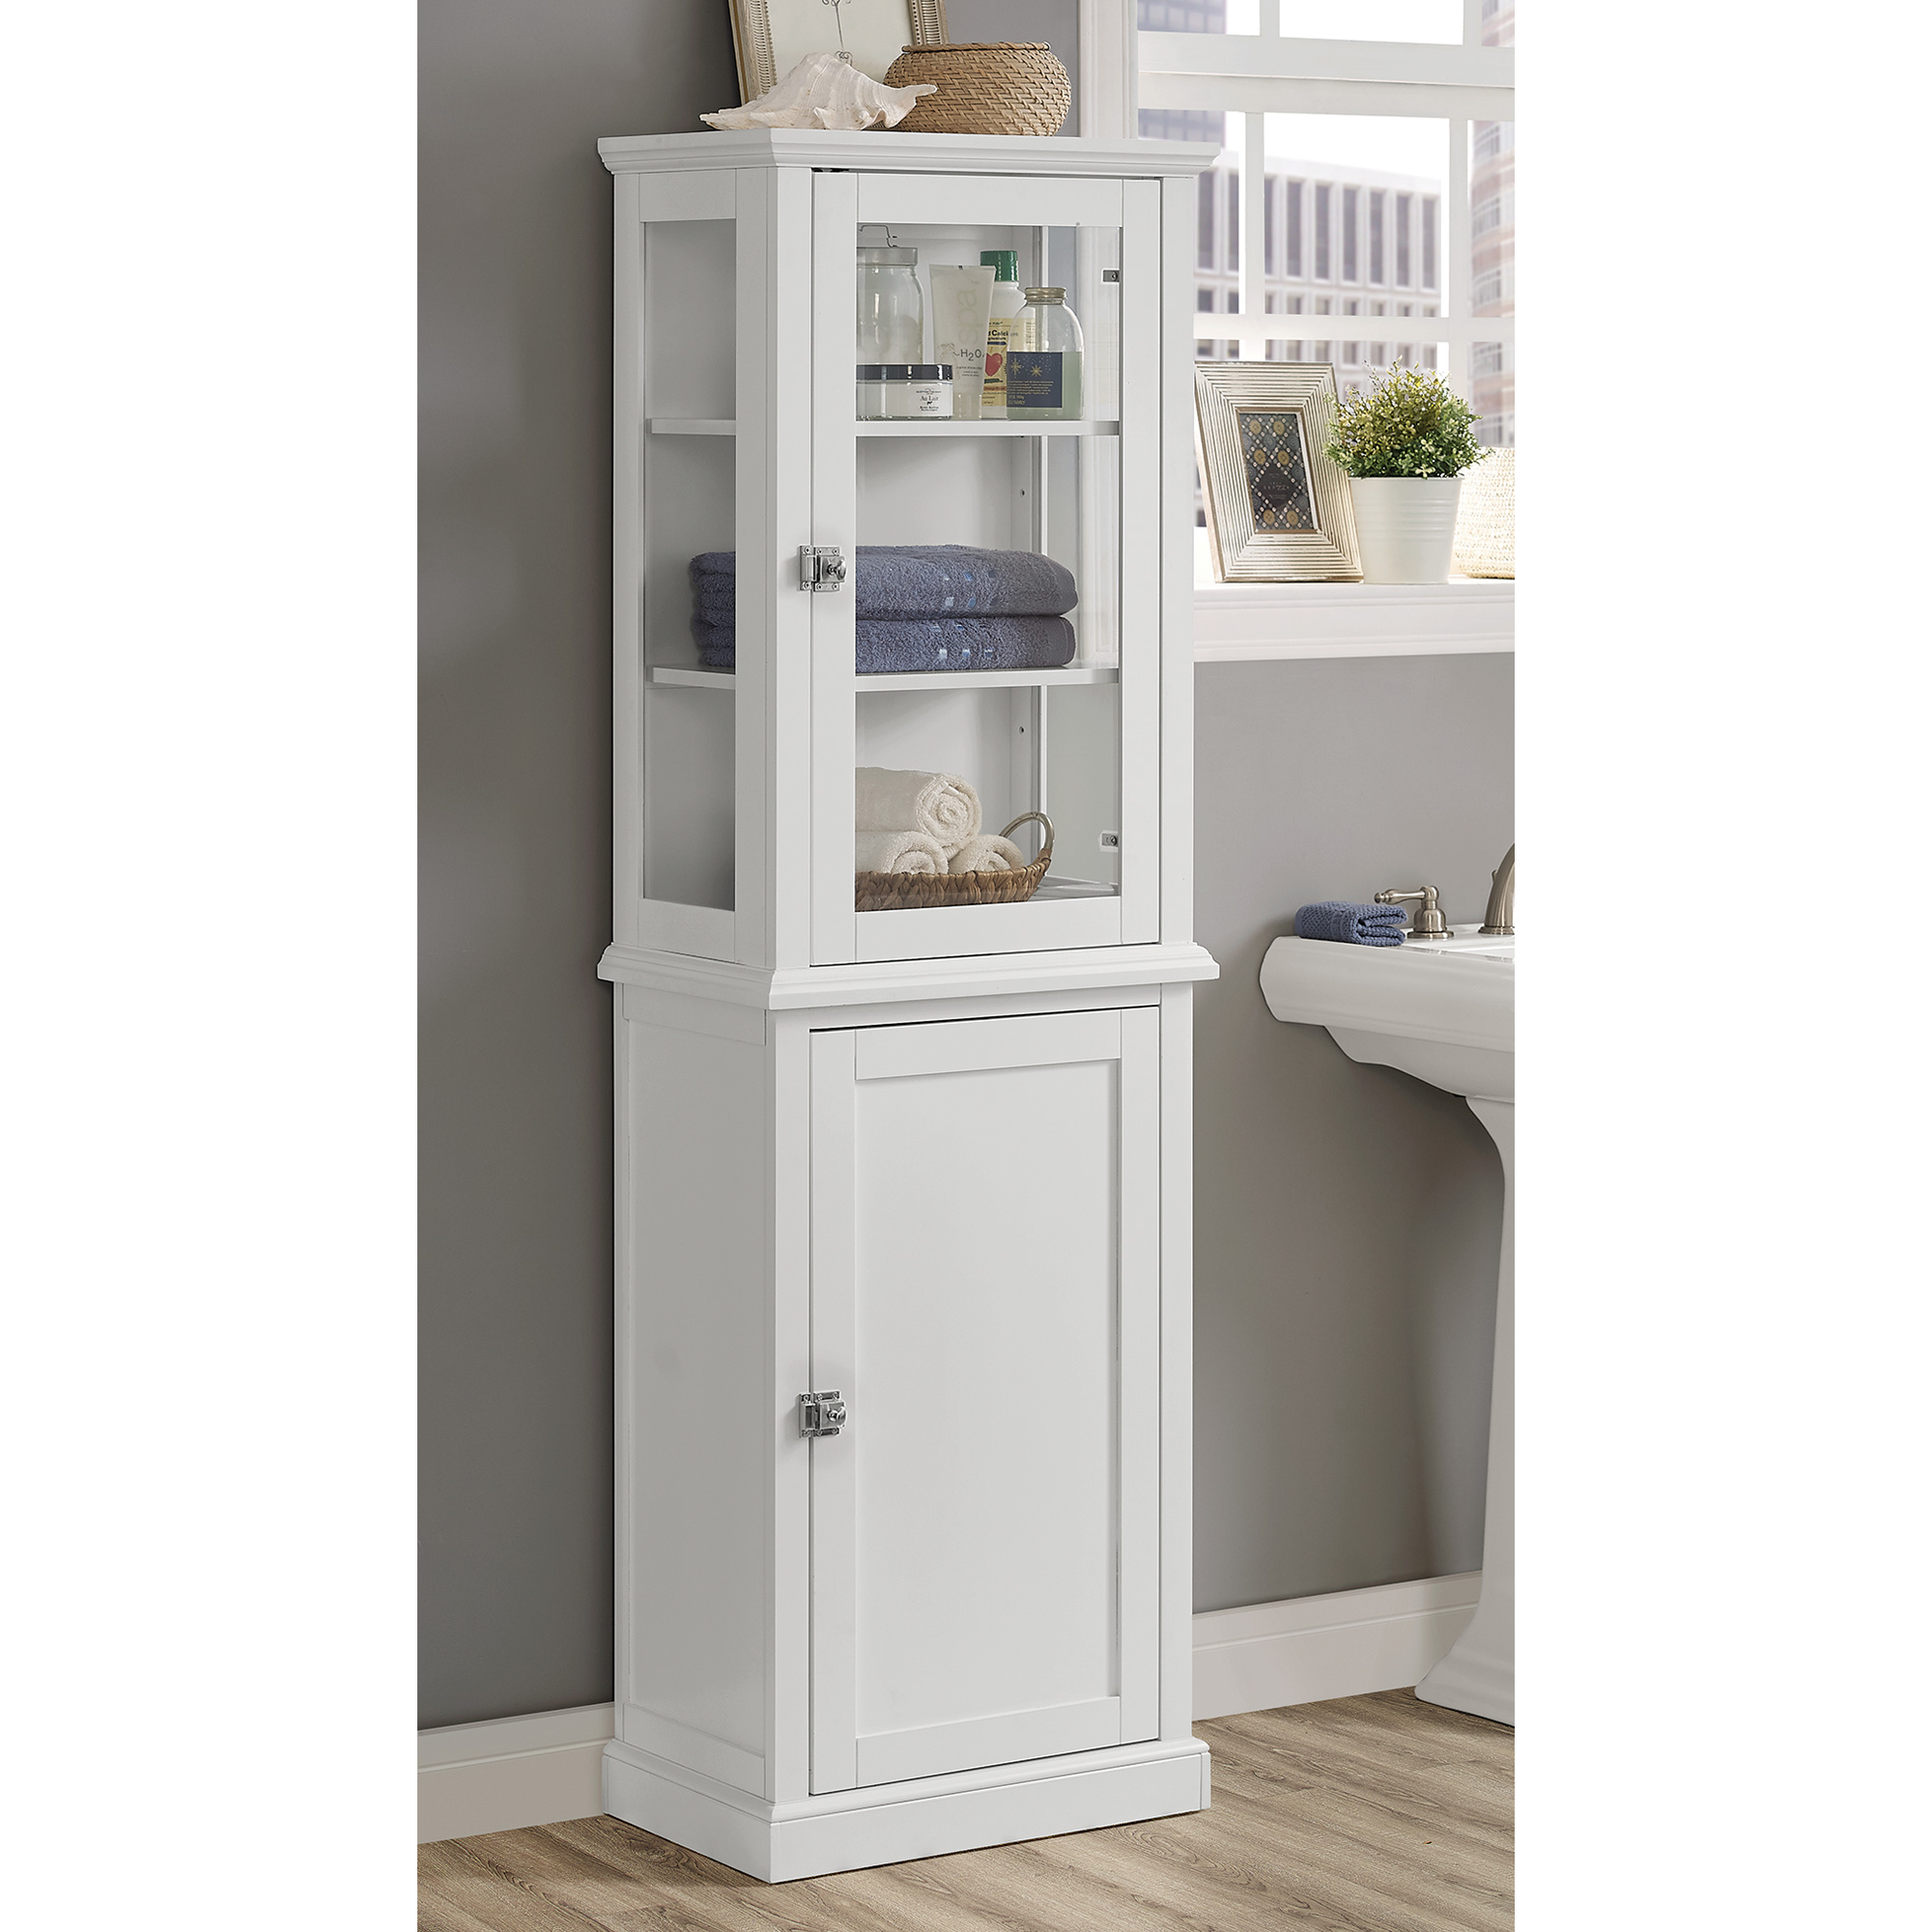 Scarsdale Tall Bathroom Cabinet White Wwwkotulas Free in size 2000 X 2000